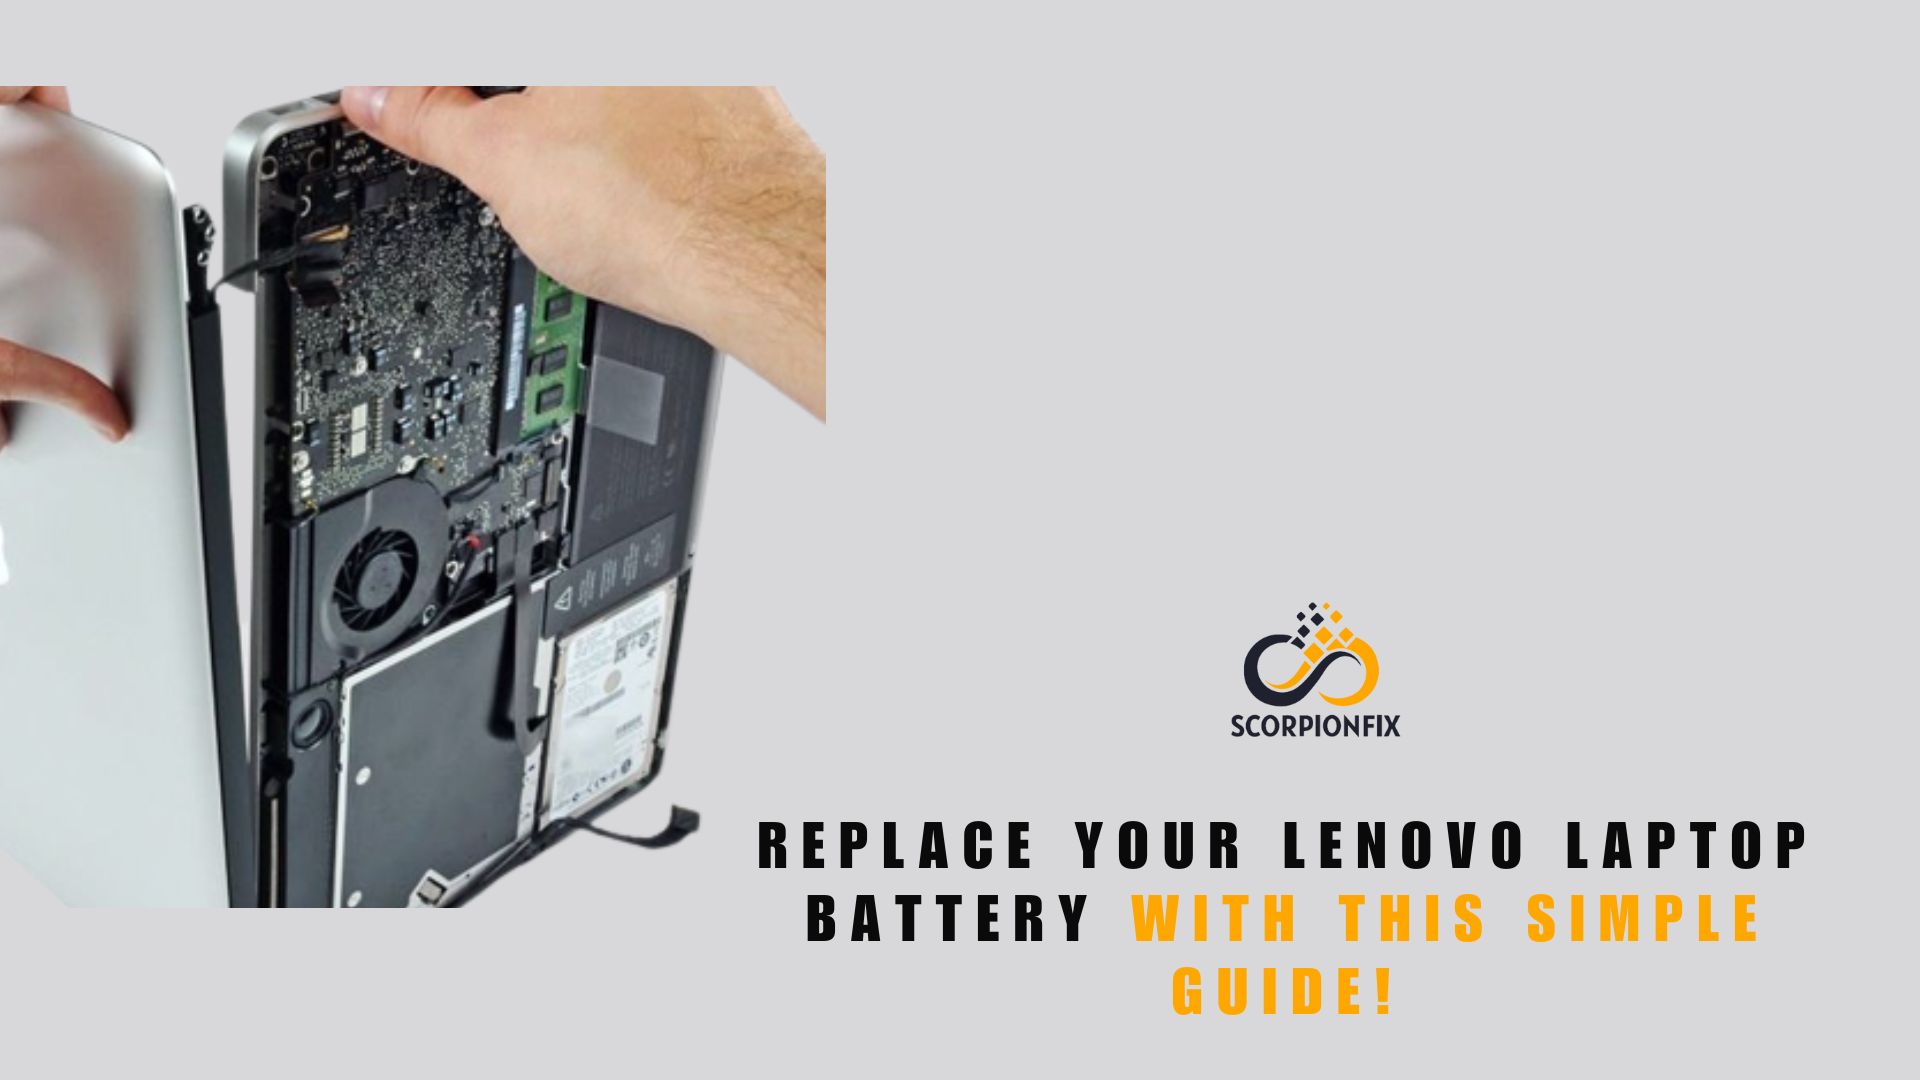 Replace Your Lenovo Laptop Battery With This Simple Guide!